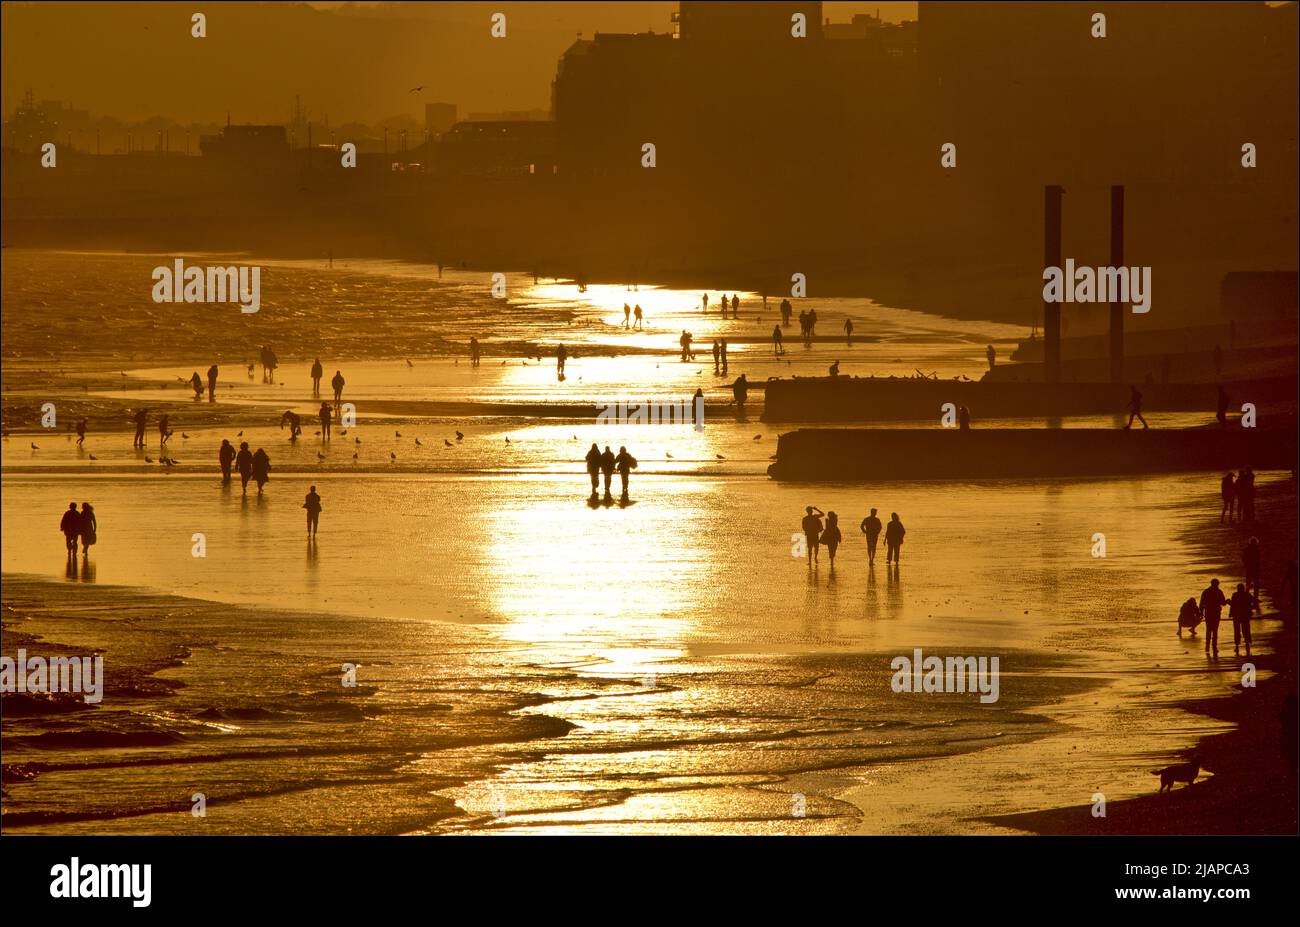 Silhouetted shapes of people on the beach at low tide, Brighton & Hove, East Sussex, England, UK. Shoreham Power Station in the distance. Vertical cast iron pillars of the old West Pier on the right. Stock Photo